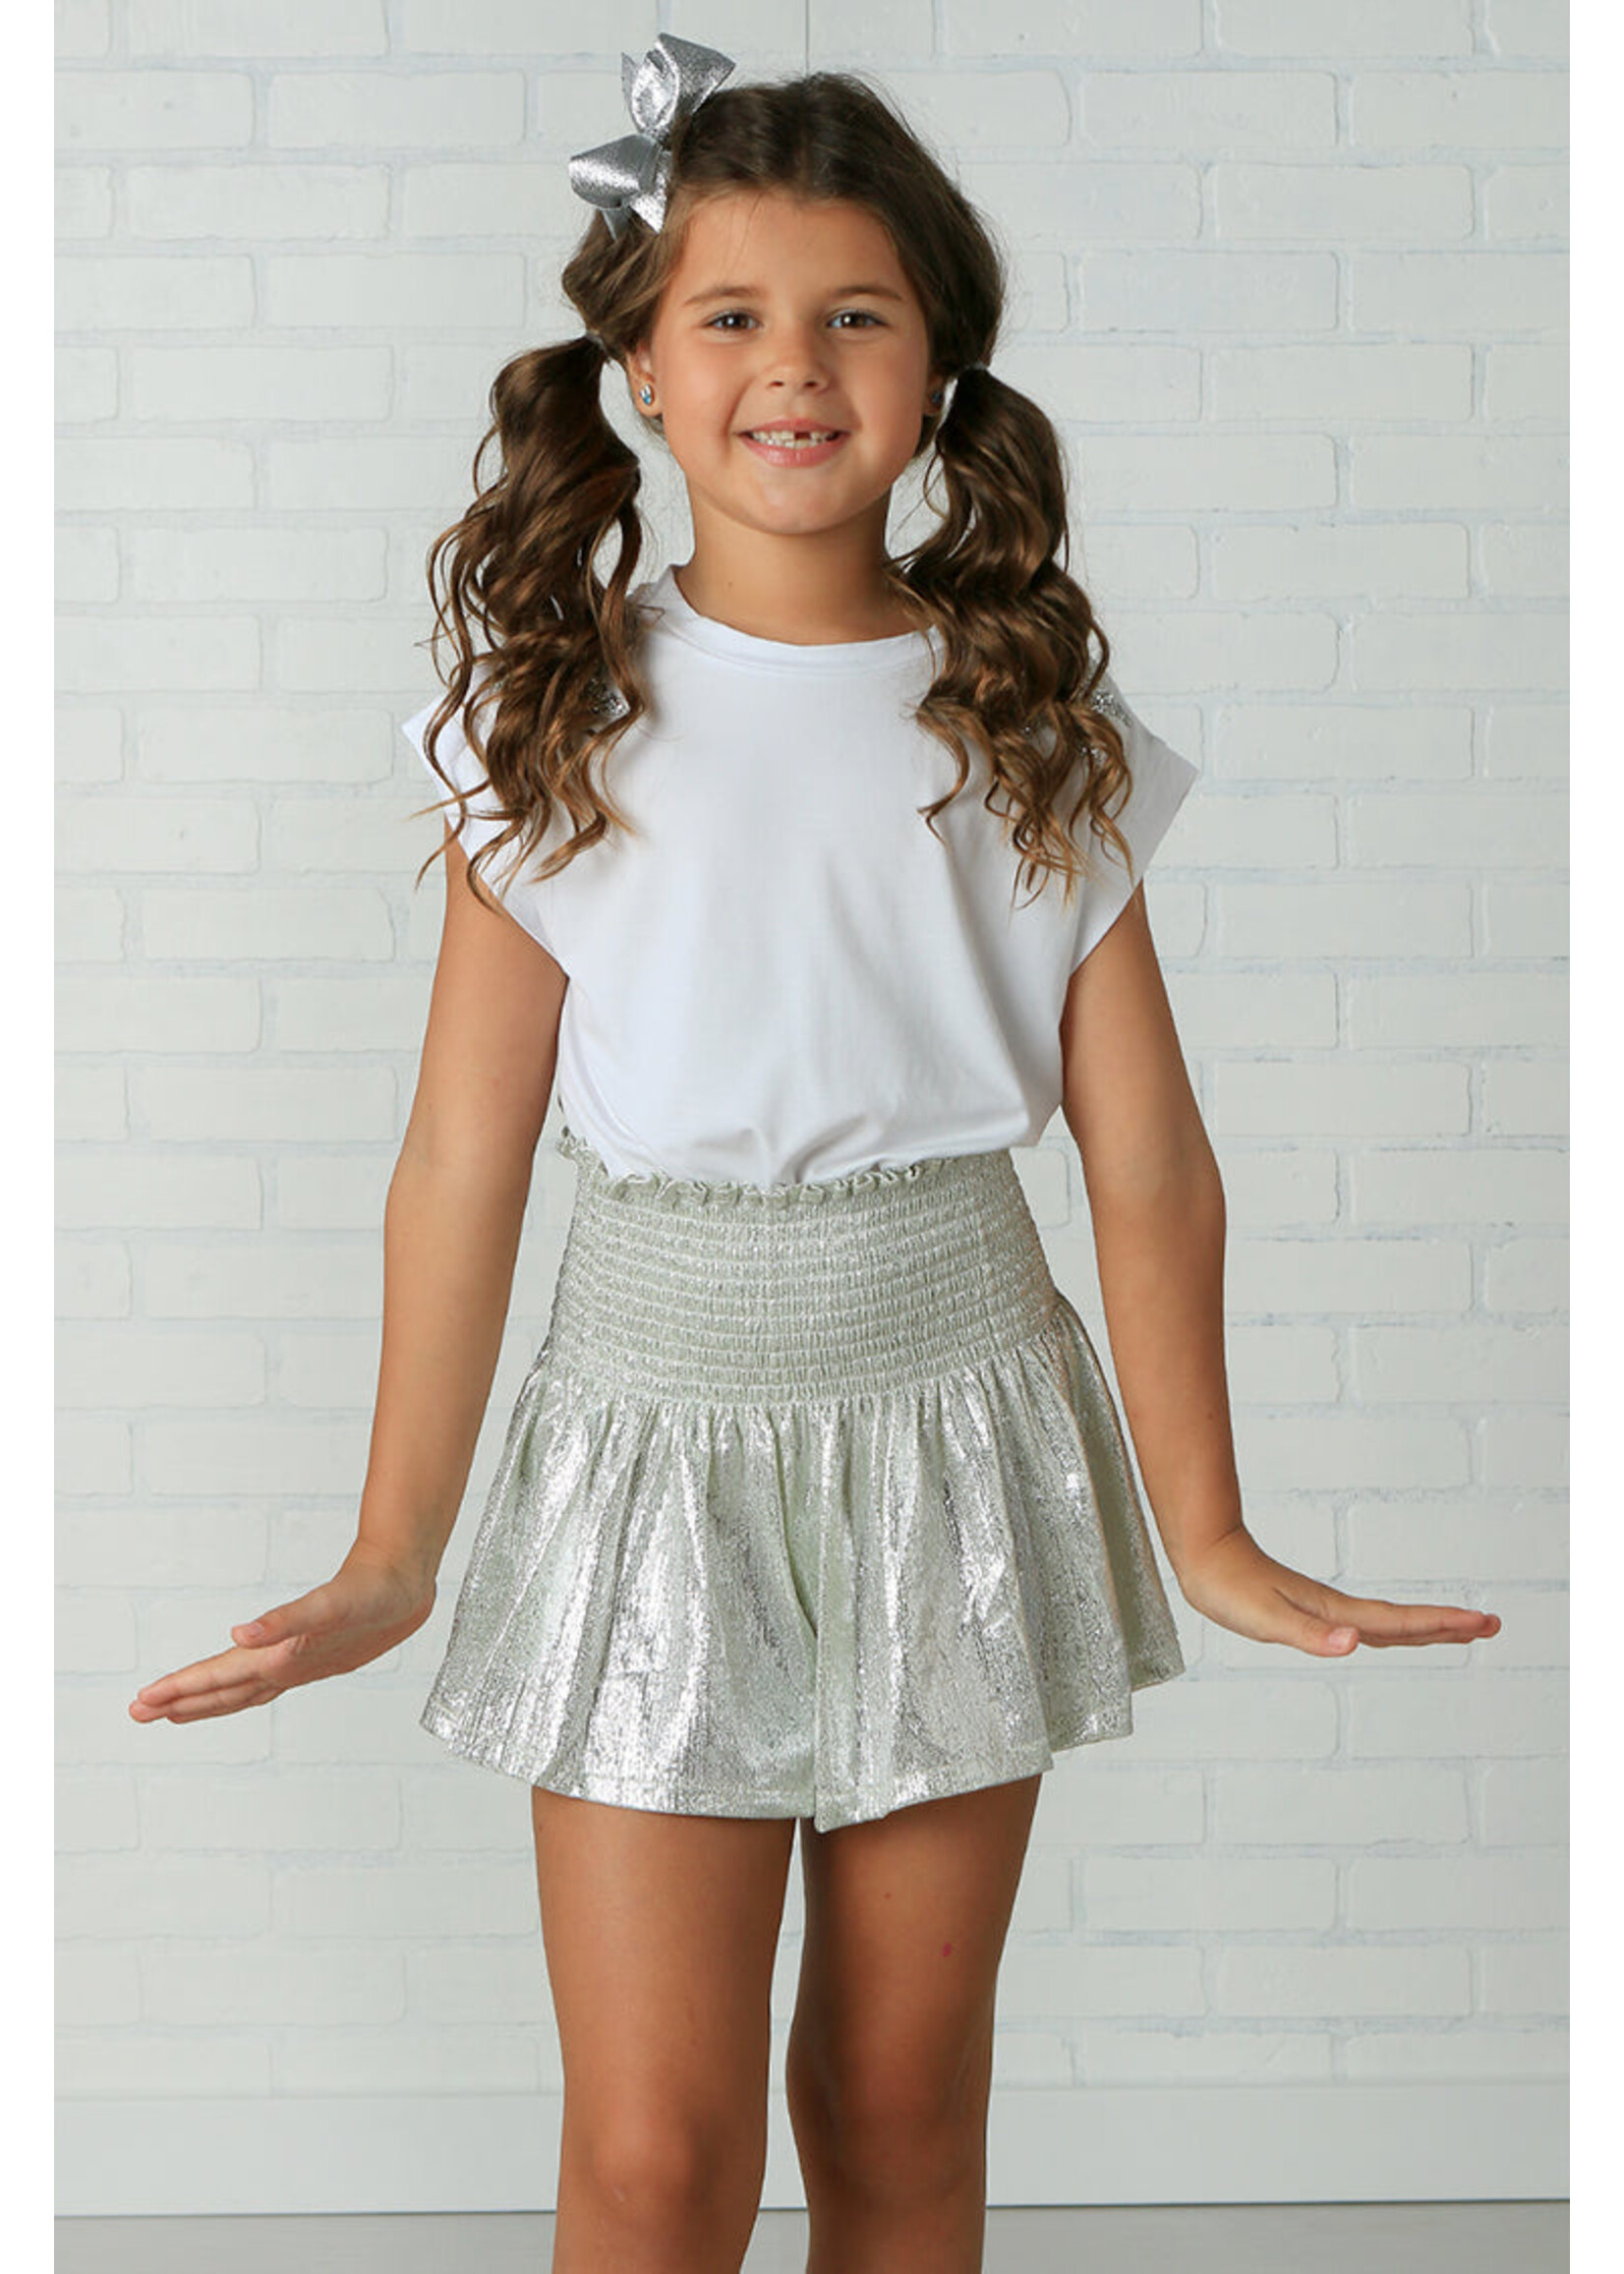 Queen of Sparkles Queen of Sparkles Girls Silver Swing Short